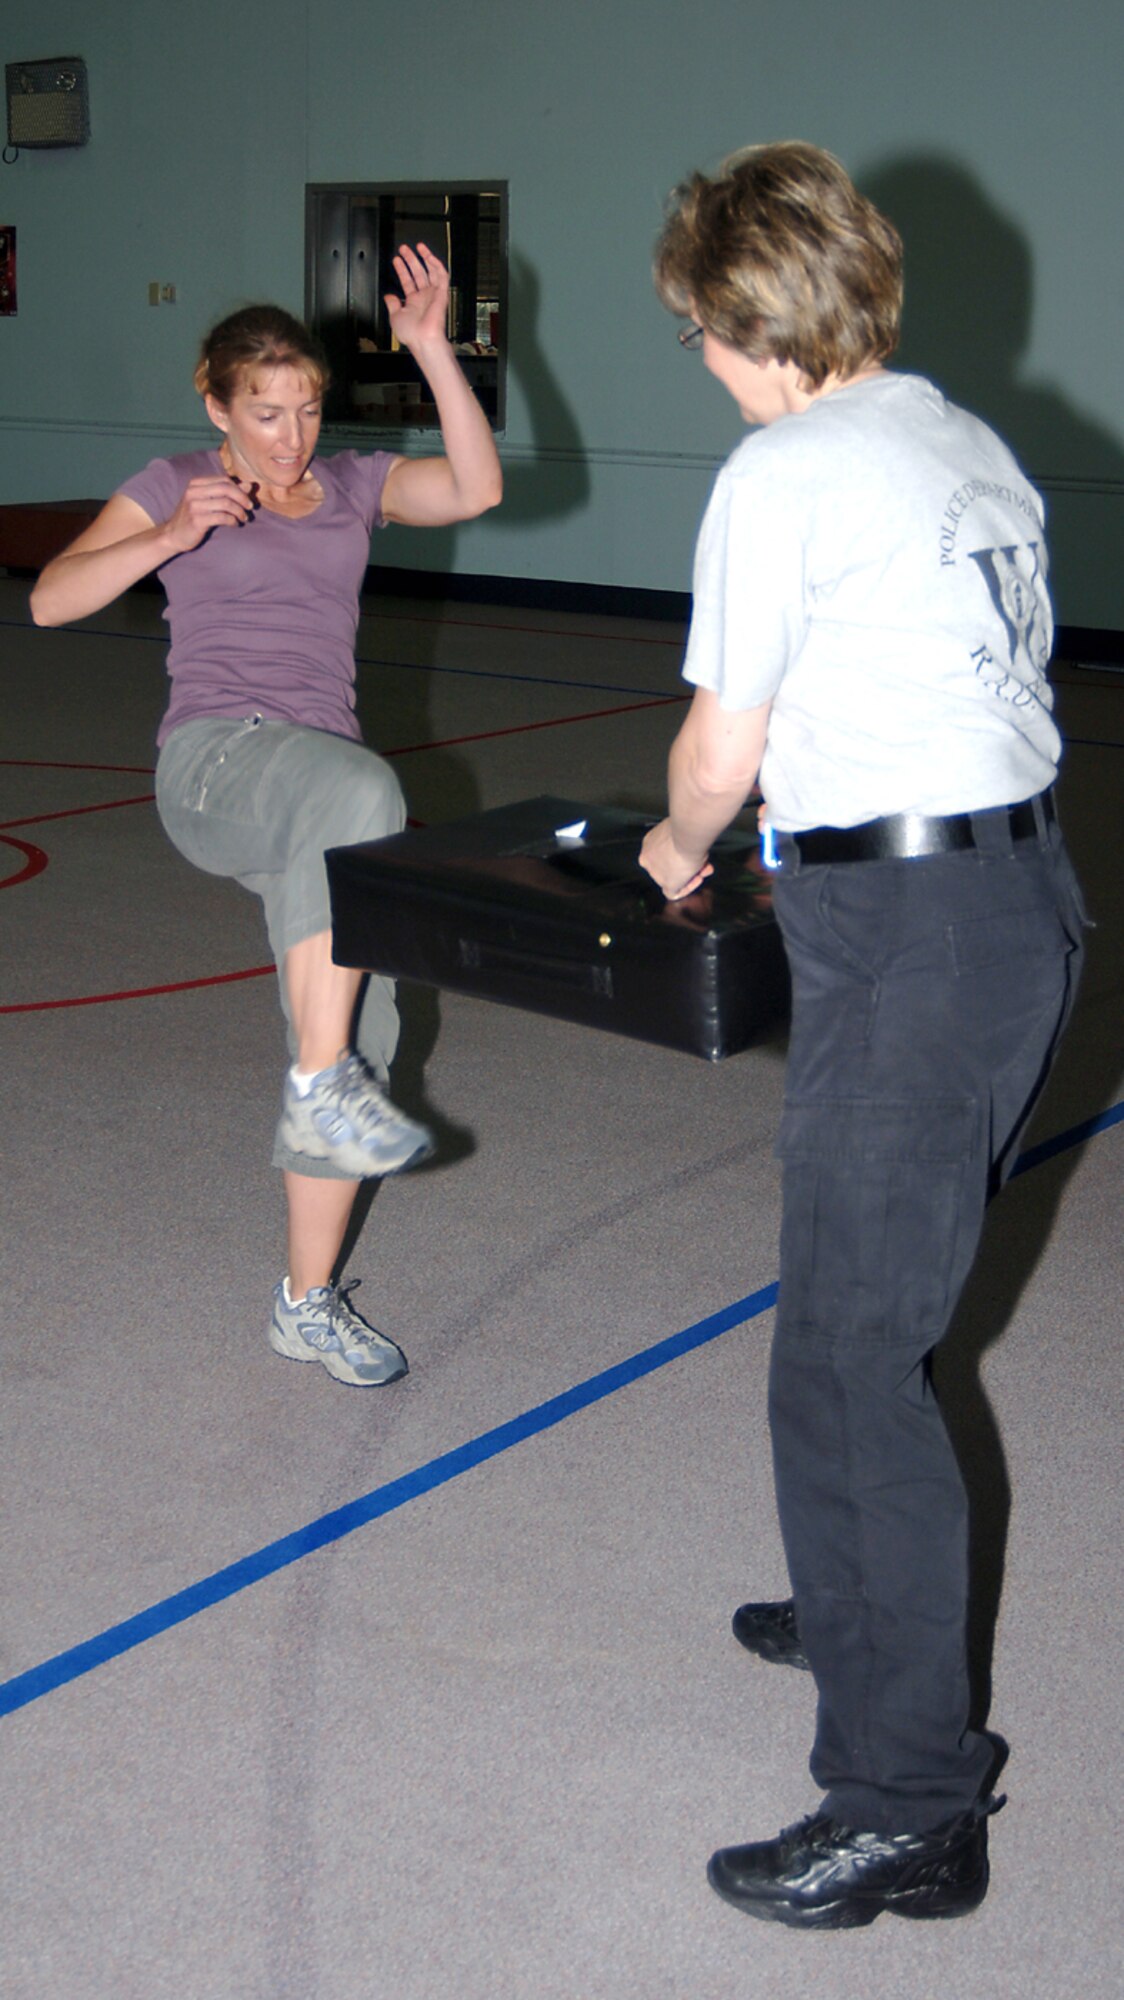 During the Rape Agression Defense Course participants were taught both physical and nonphysical ways to defend against an assault. Representatives from the Mississippi Univeristy for Women Police Department were on hand to teach the RAD class. (U.S. Air Force Photo/ Airman 1st Class Danielle Powell)